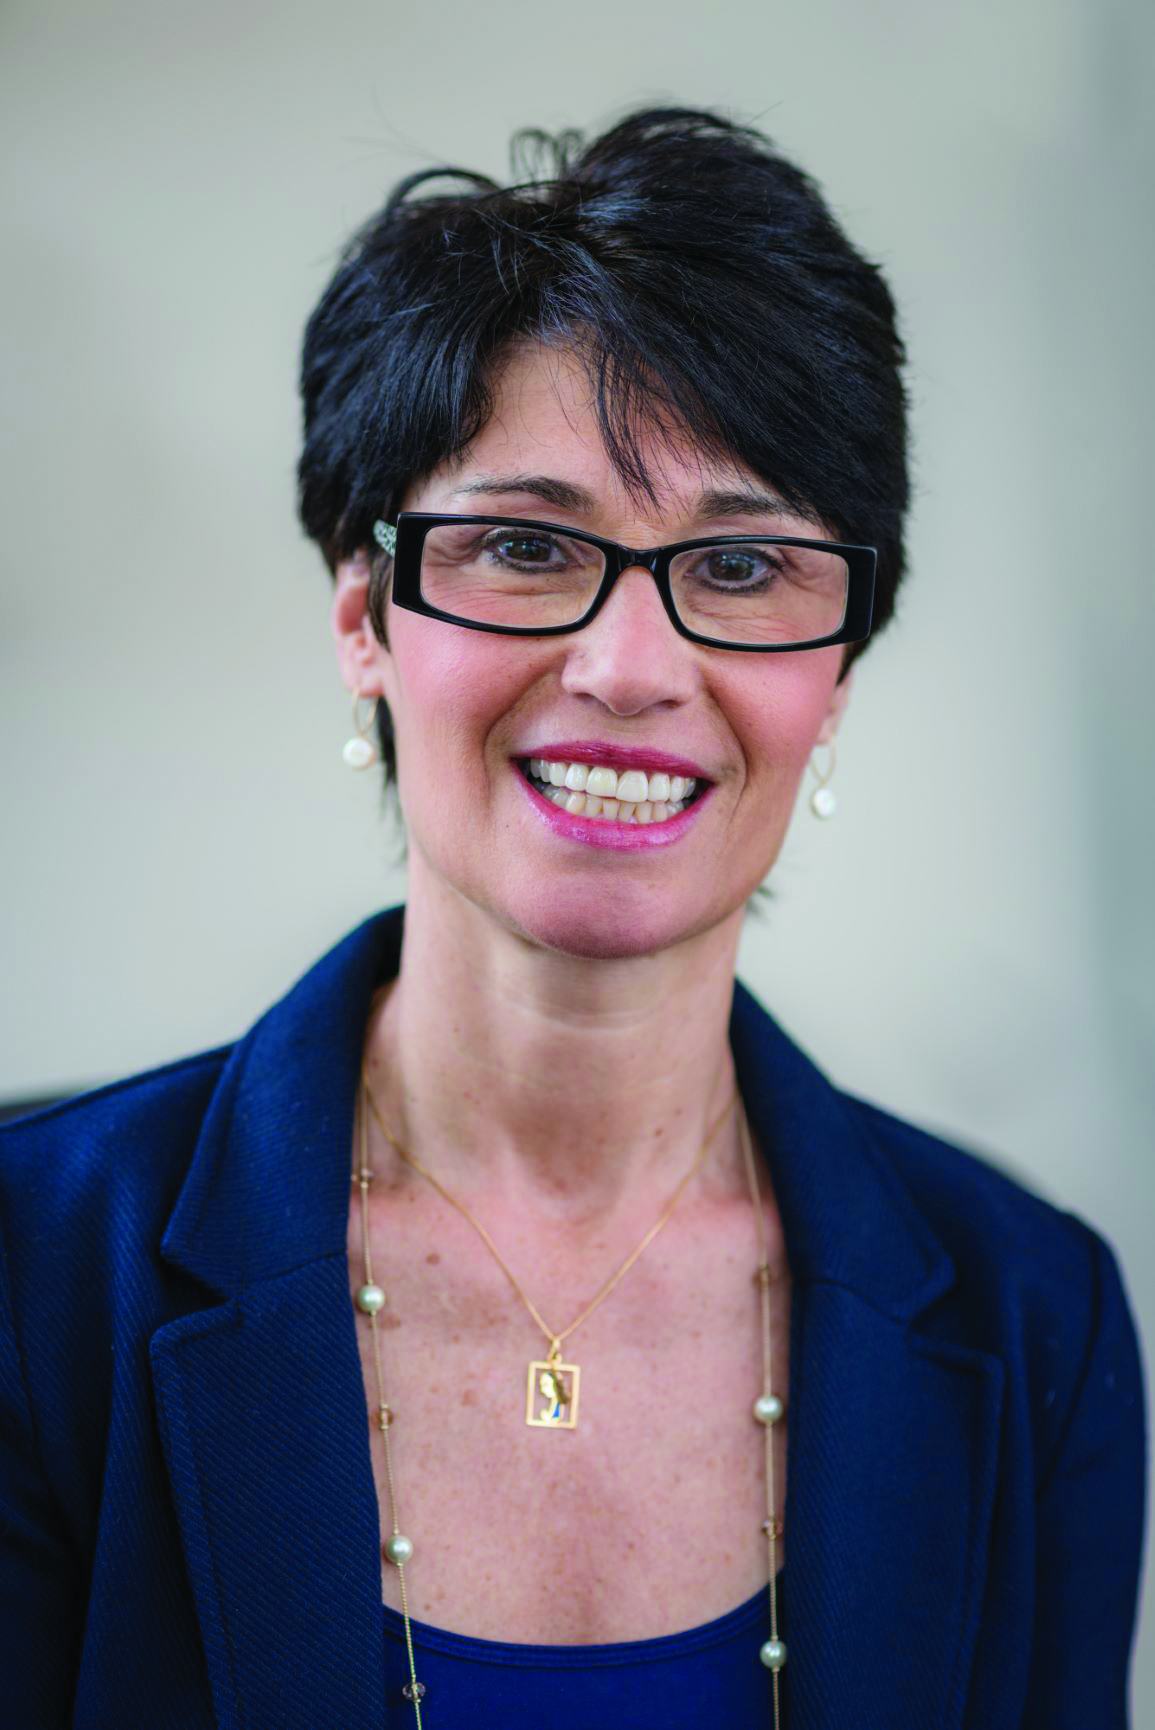 Terri Jabaley, PhD, RN, OCN®, is a clinical inquiry specialist at the Phyllis F. Cantor Center for Research in Nursing and Patient Care Services at Dana-Farber Cancer Institute in Boston, MA.